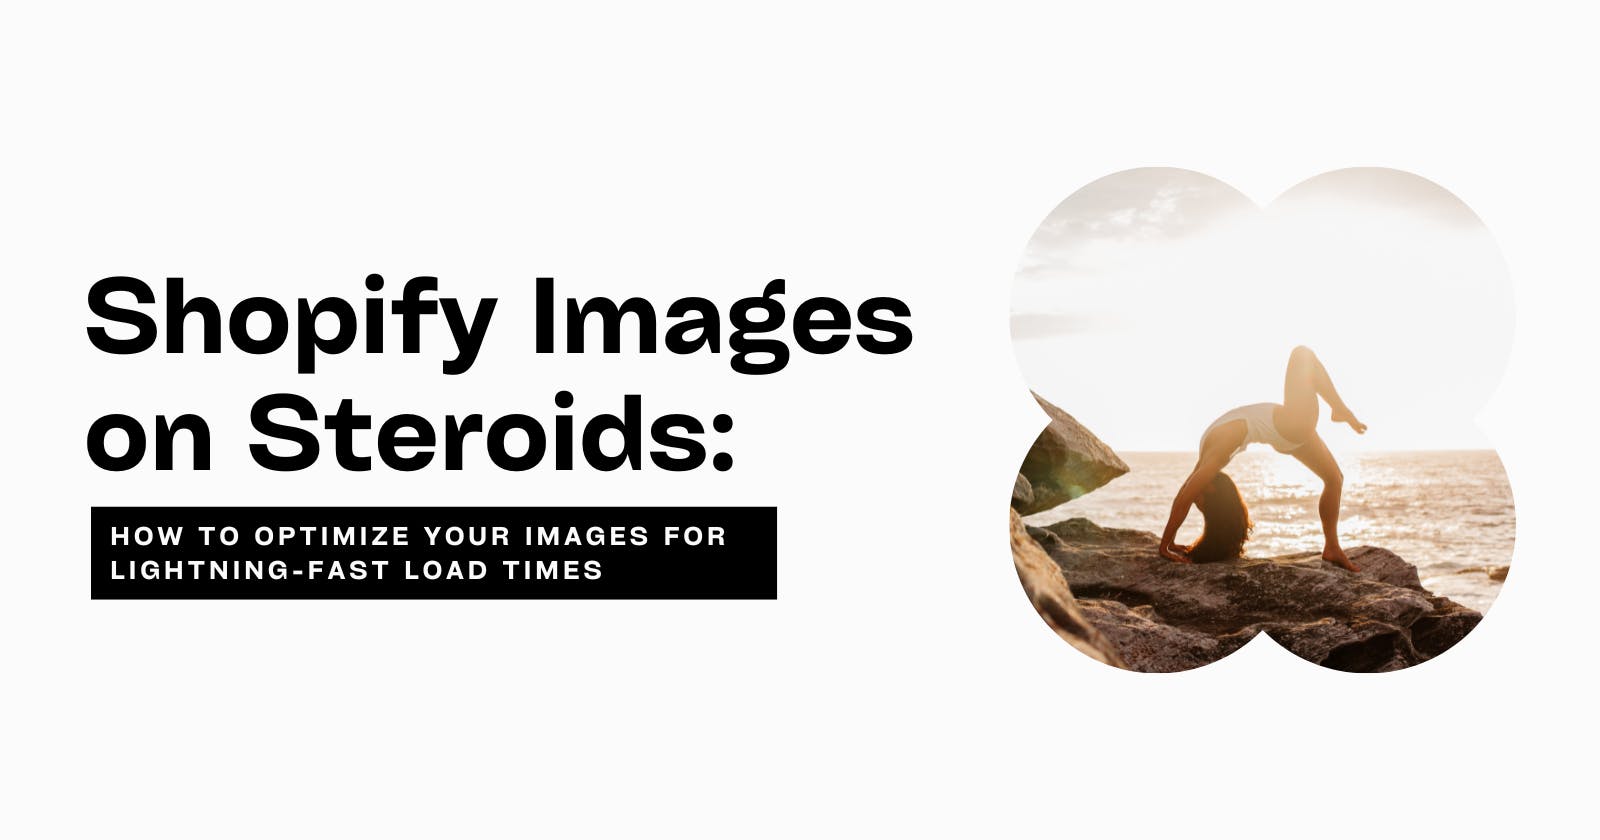 Shopify Images on Steroids: How to Optimize Your Images for Lightning-Fast Load Times